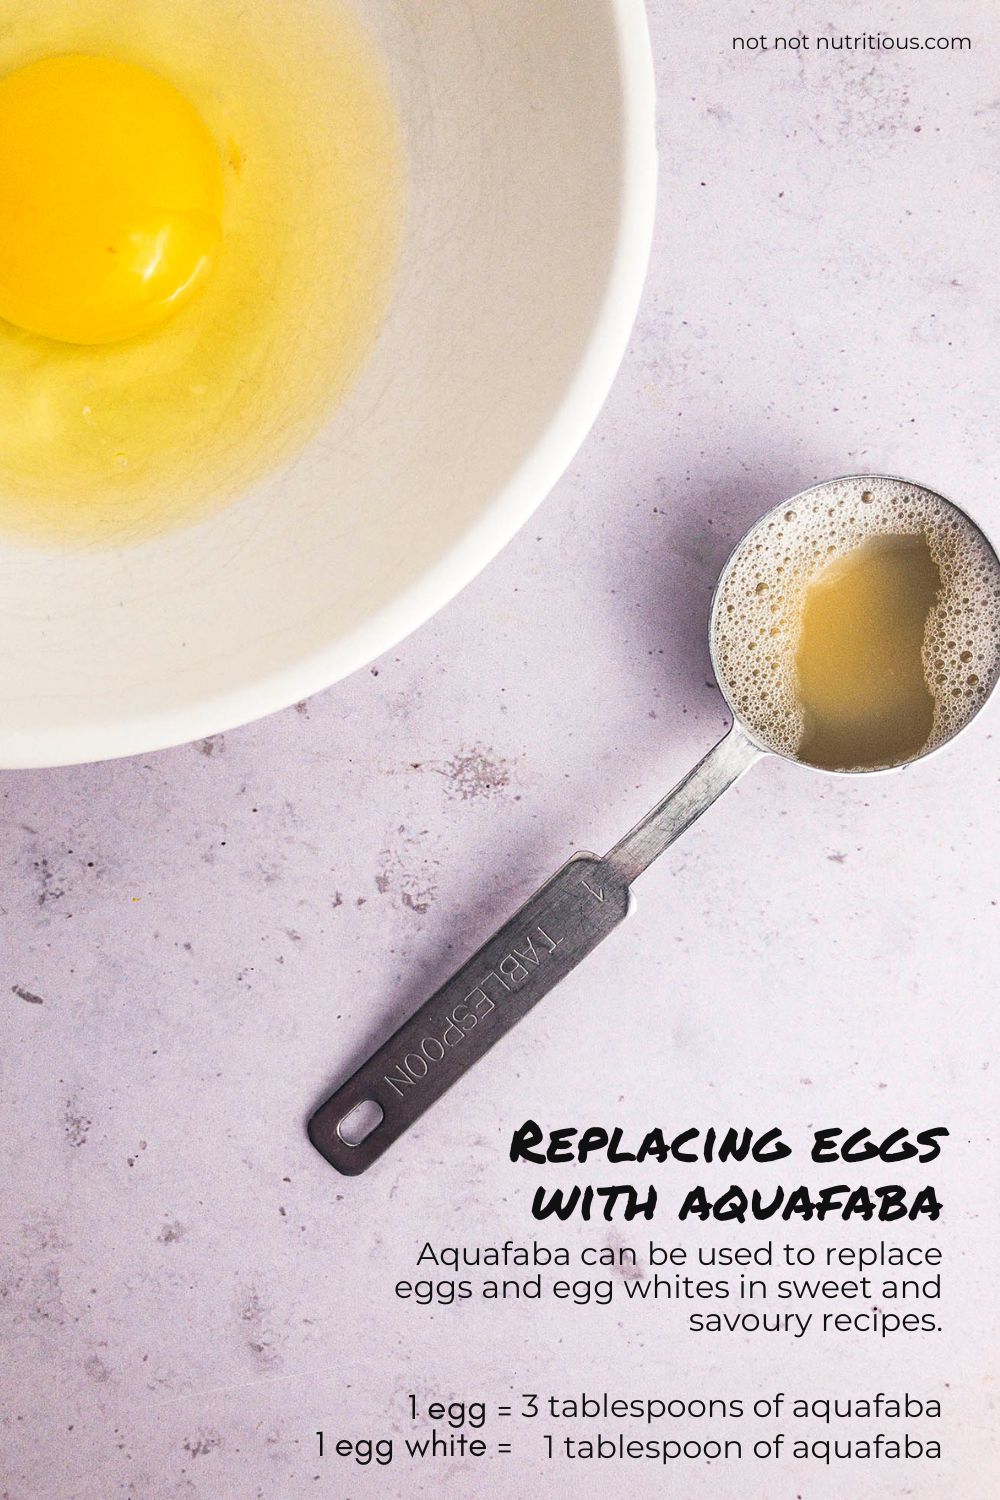 Graphic: Replacing eggs with aquafaba. 1 egg equals 3 tablespoons; 1 egg white equals 1 tablespoon